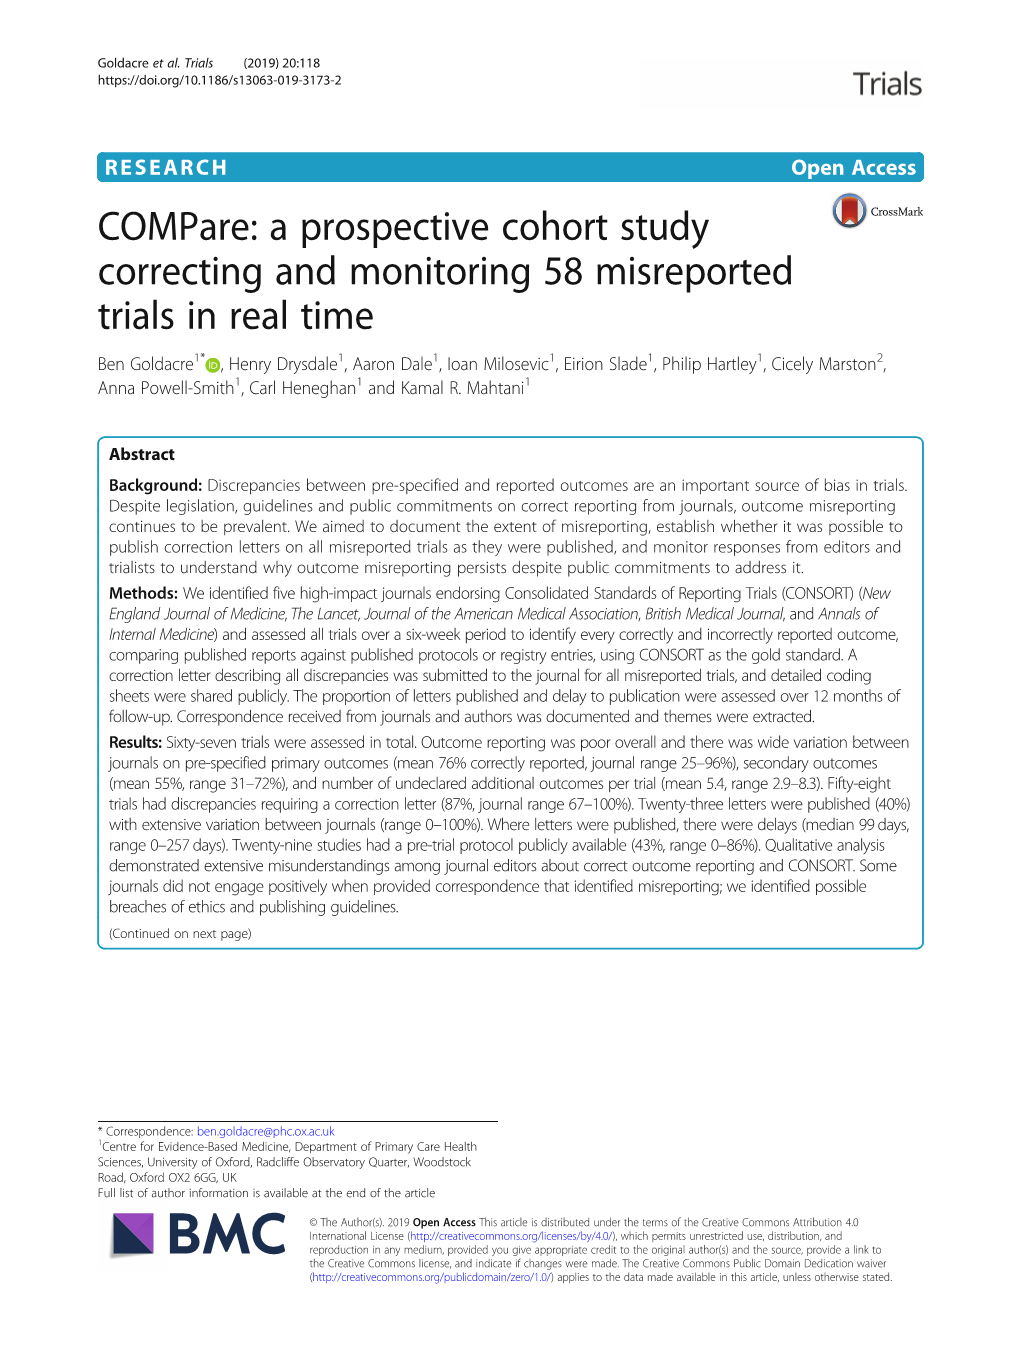 Compare: a Prospective Cohort Study Correcting and Monitoring 58